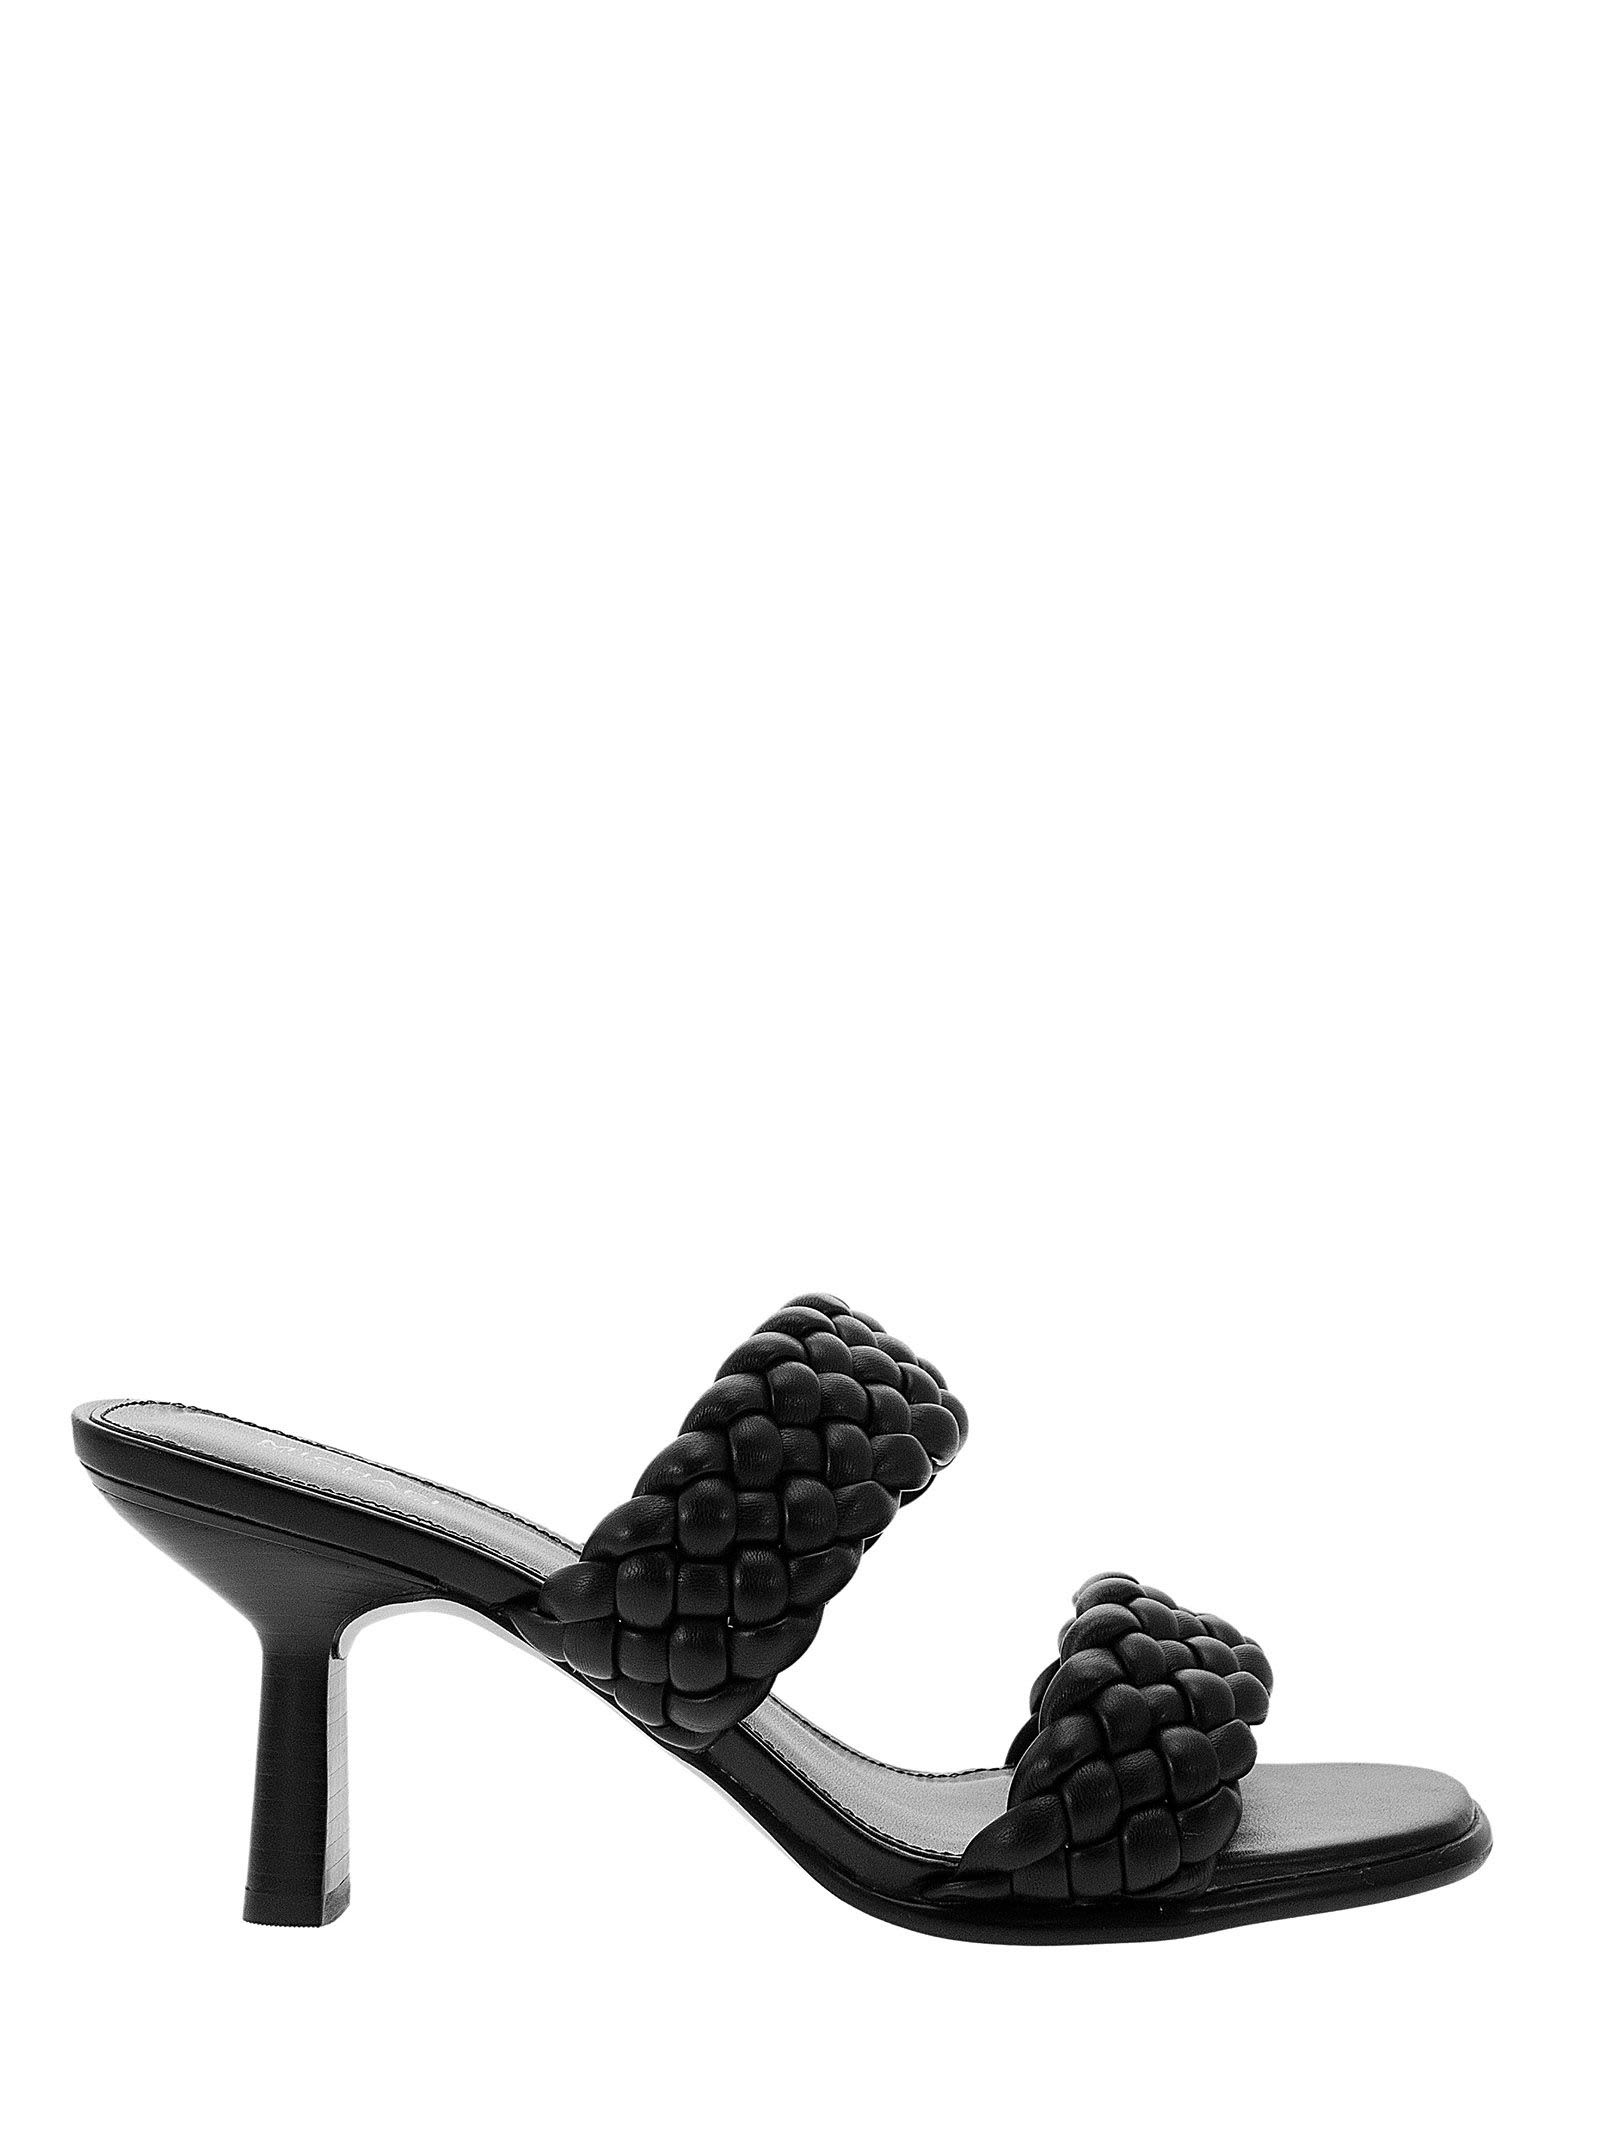 Buy Michael Kors Amelia - Braided Mule online, shop Michael Kors shoes with free shipping